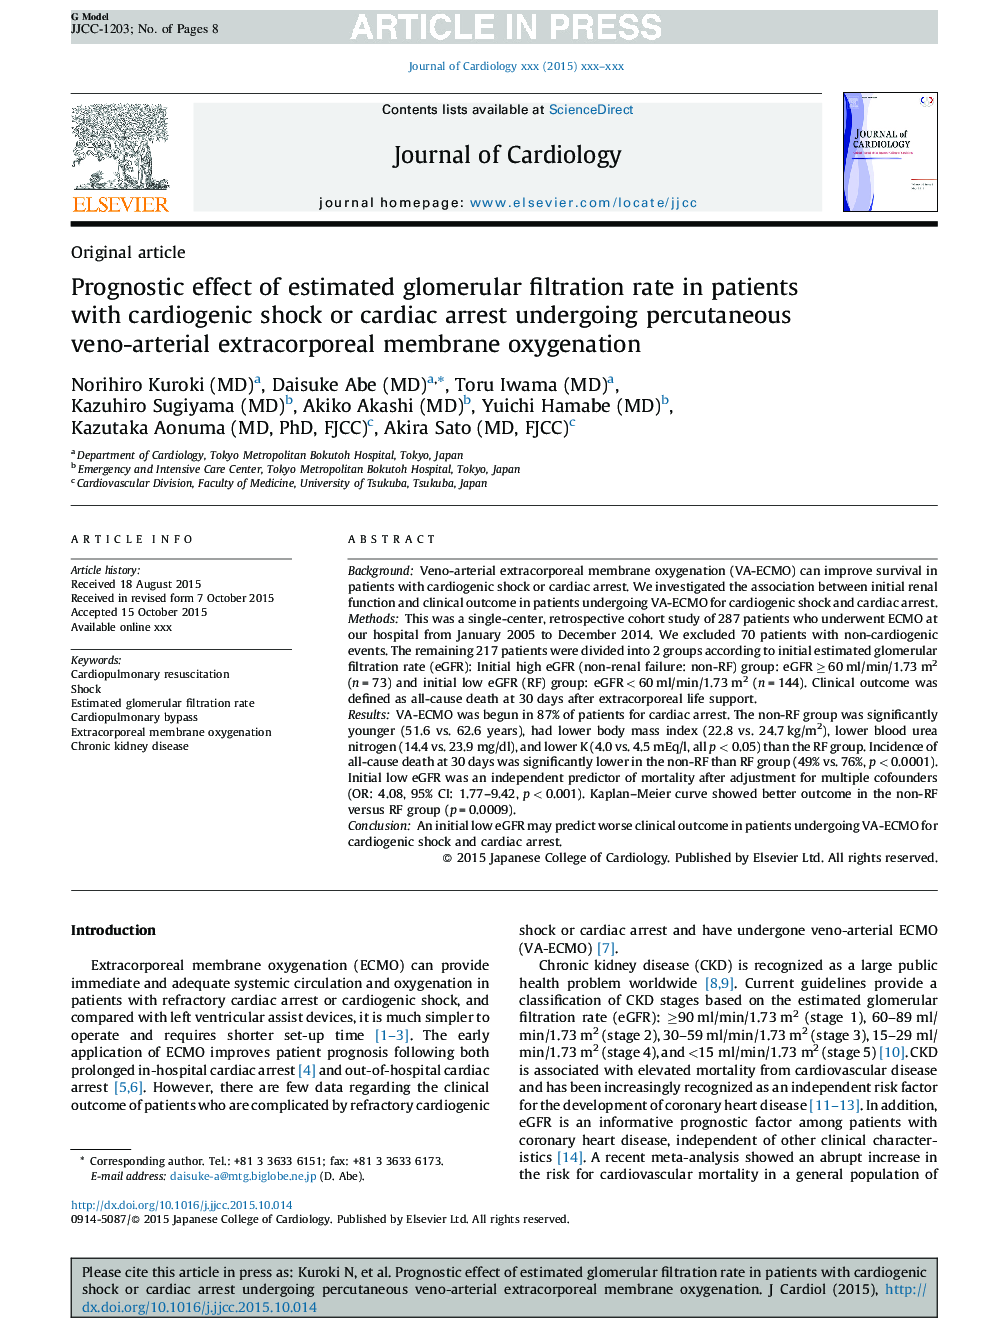 Prognostic effect of estimated glomerular filtration rate in patients with cardiogenic shock or cardiac arrest undergoing percutaneous veno-arterial extracorporeal membrane oxygenation